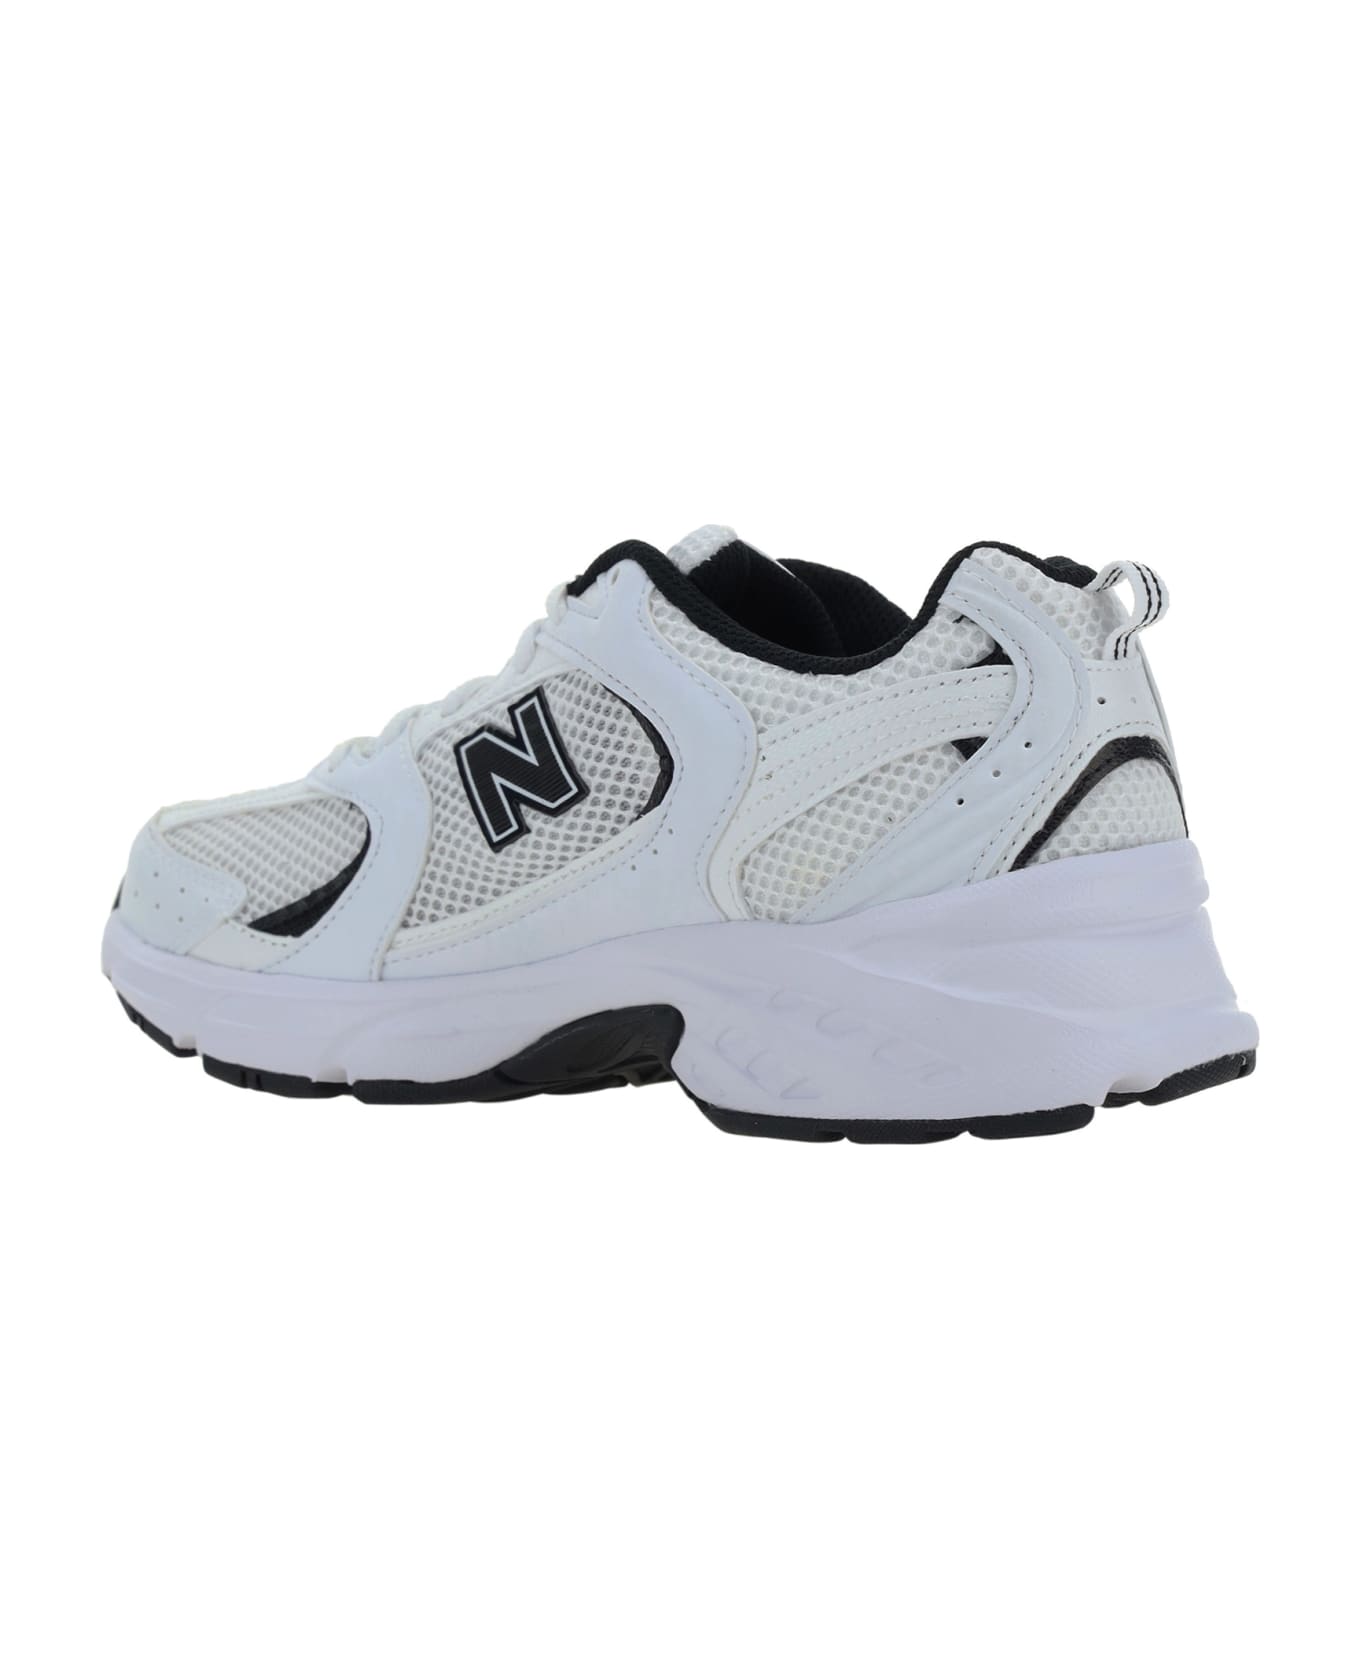 New Balance Lifestyle Sneakers - White スニーカー